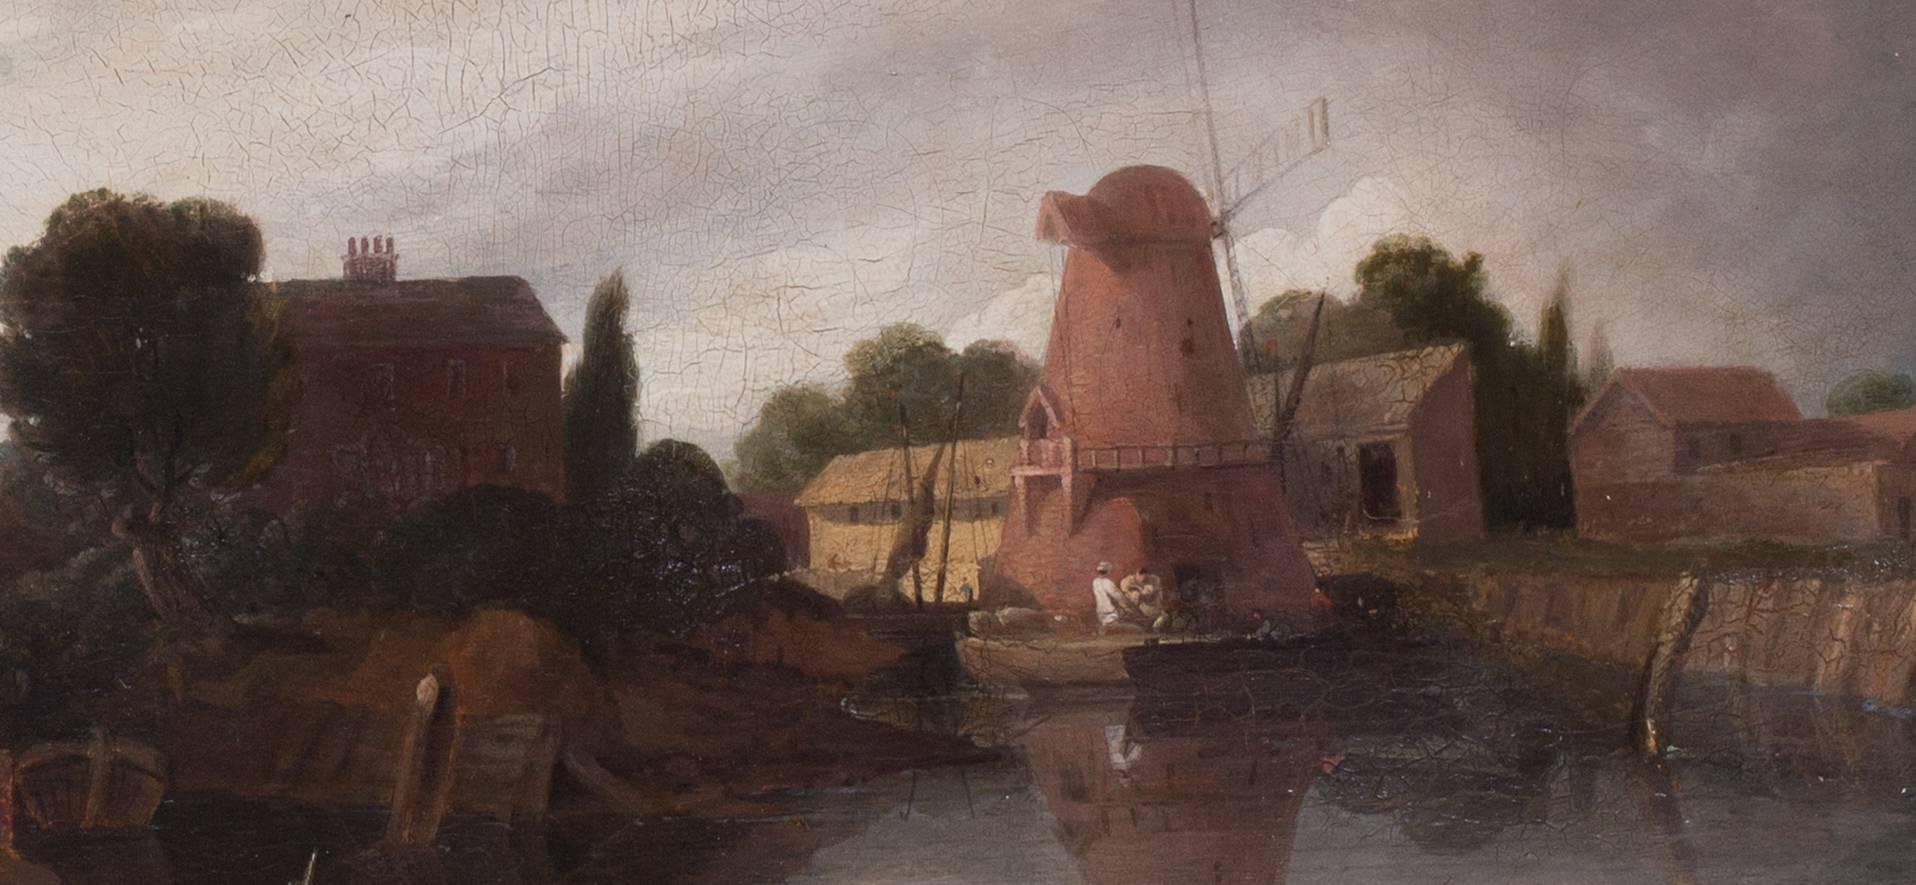 A fisherman before a windmill - Painting by Unknown